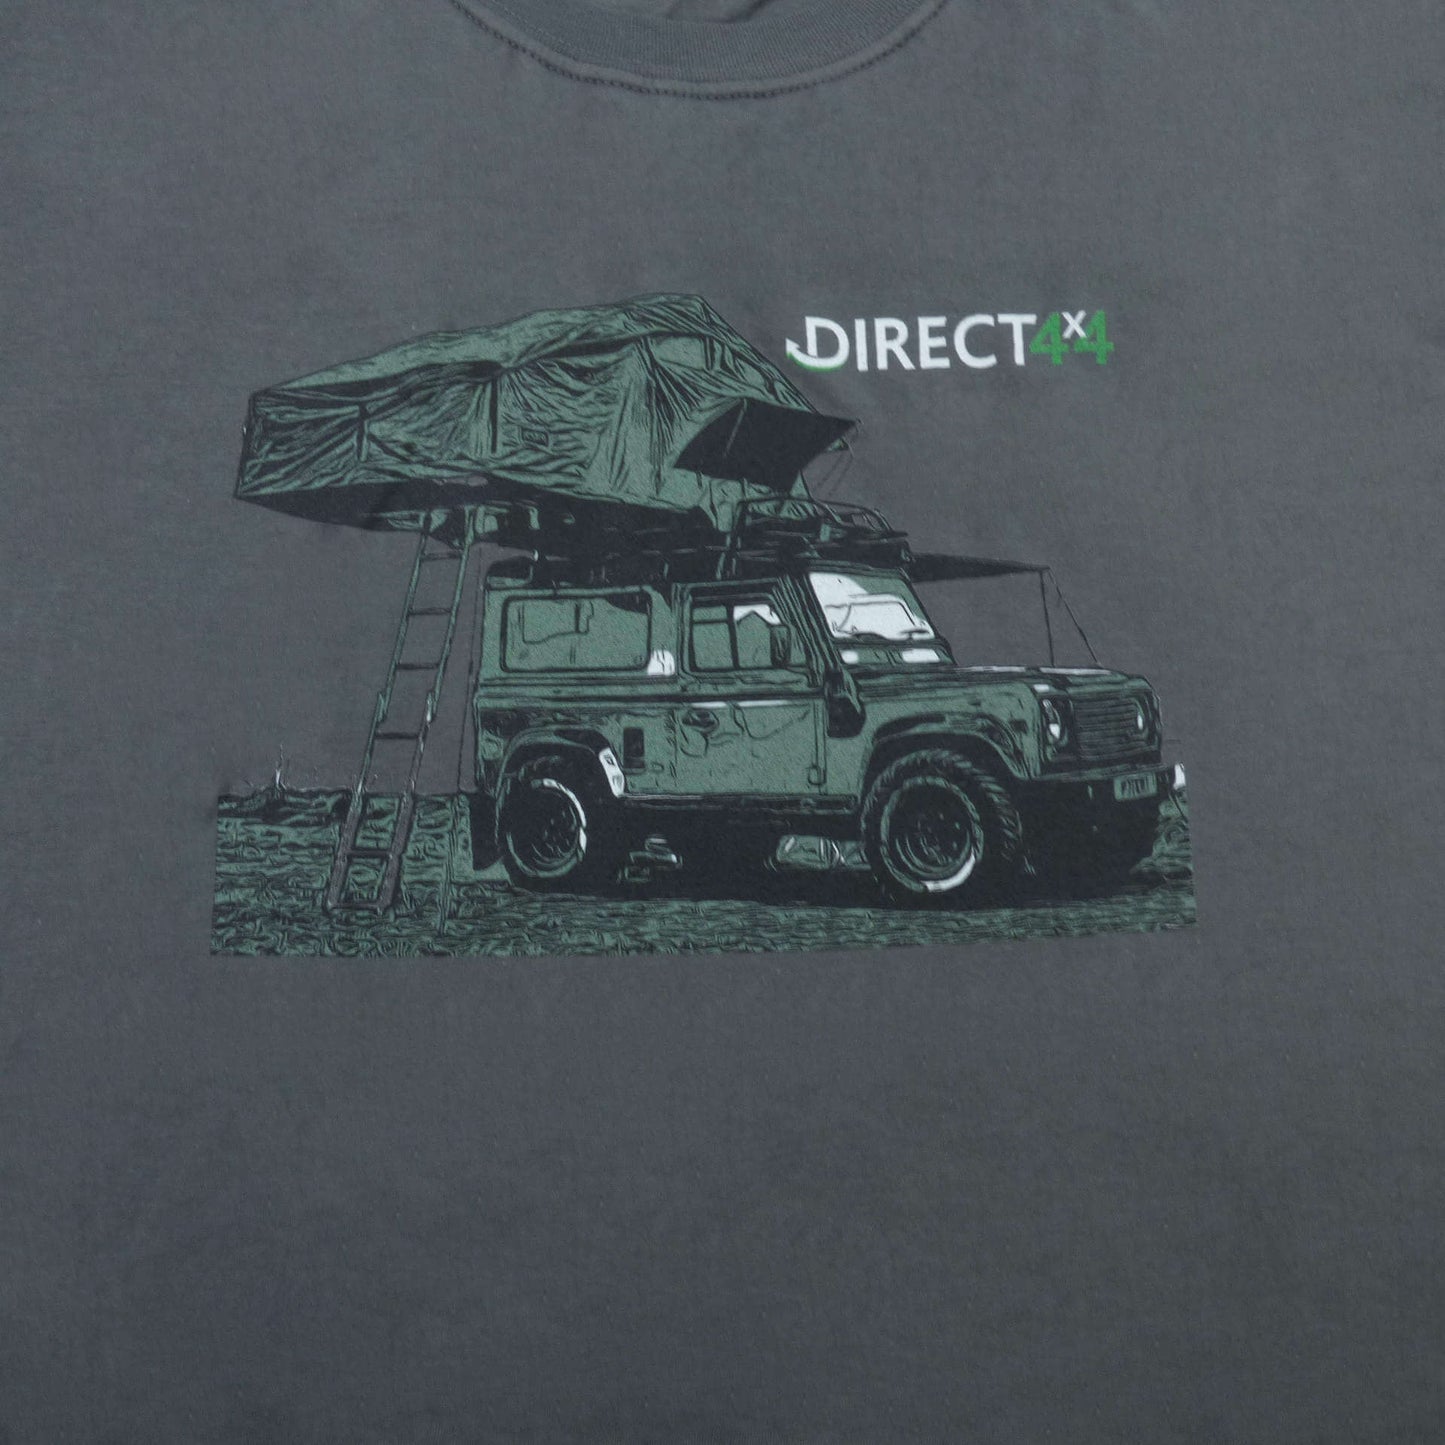 Direct4x4 Crew Neck T-Shirt -  - sold by Direct4x4